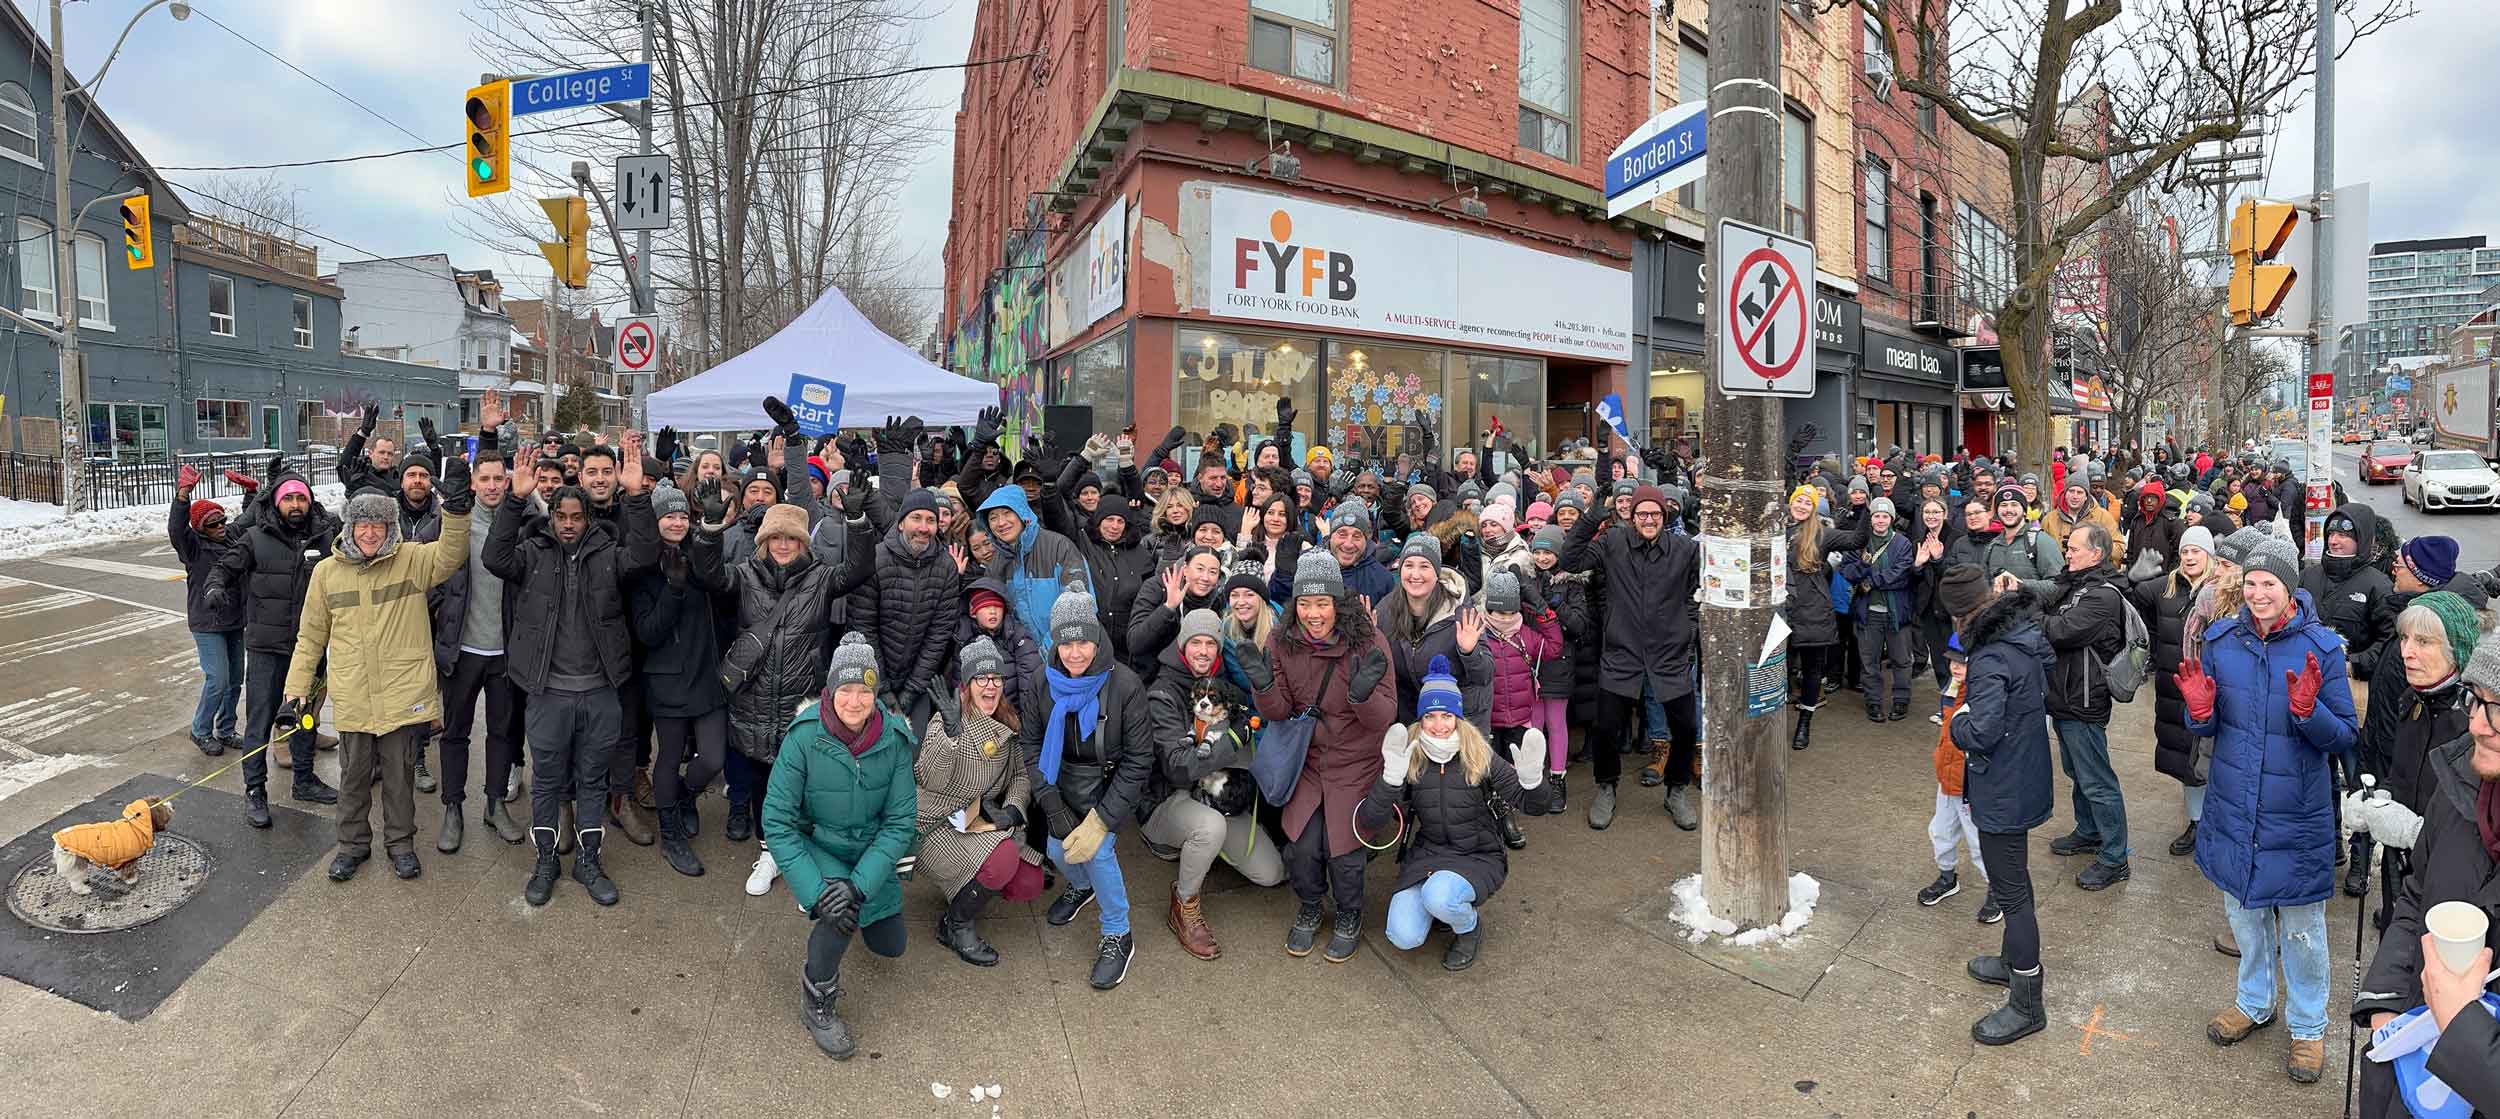 A large group of people in front of Fort York Food bank in winter